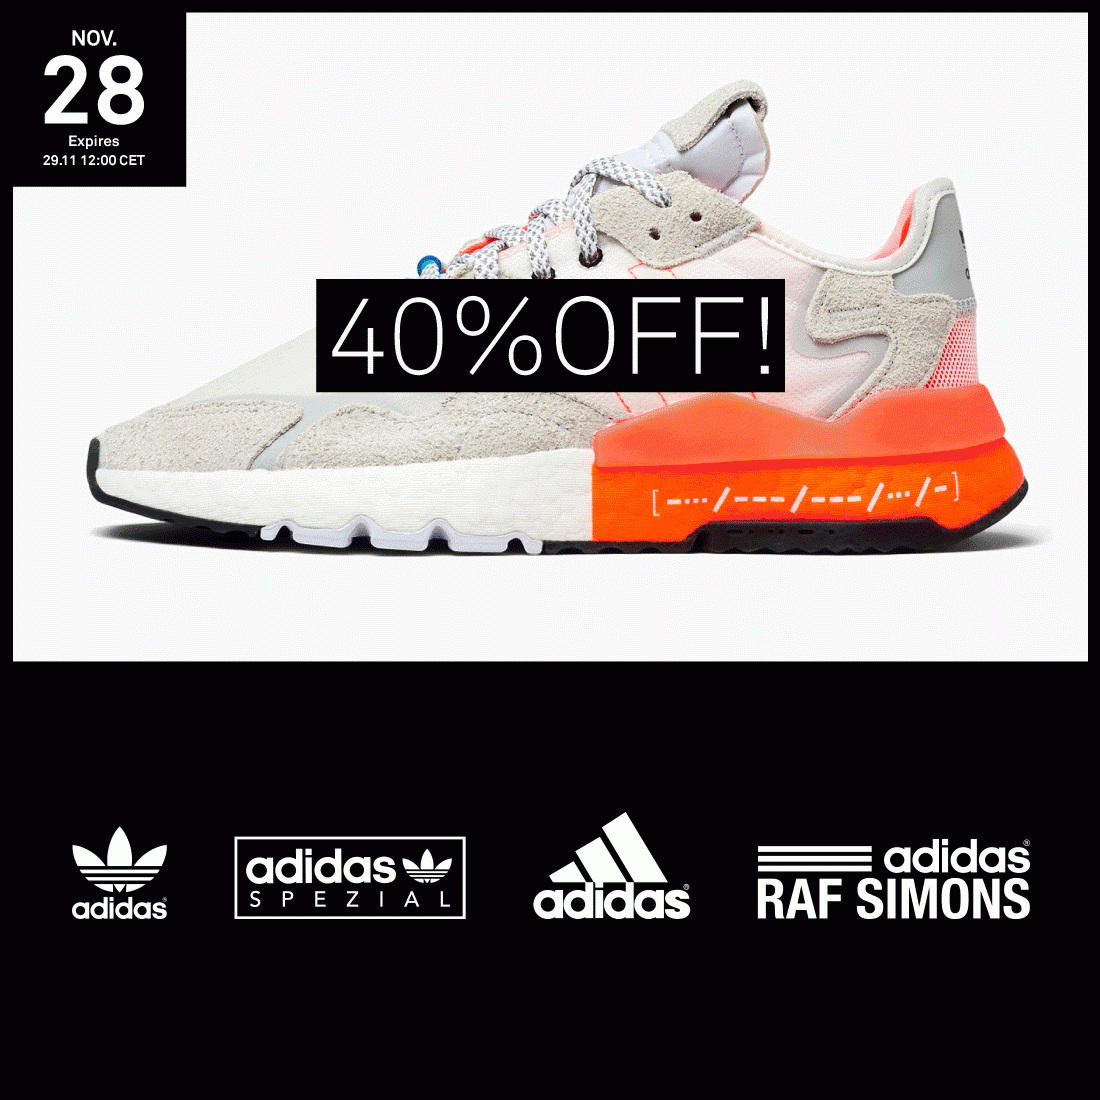 adidas deal of the week